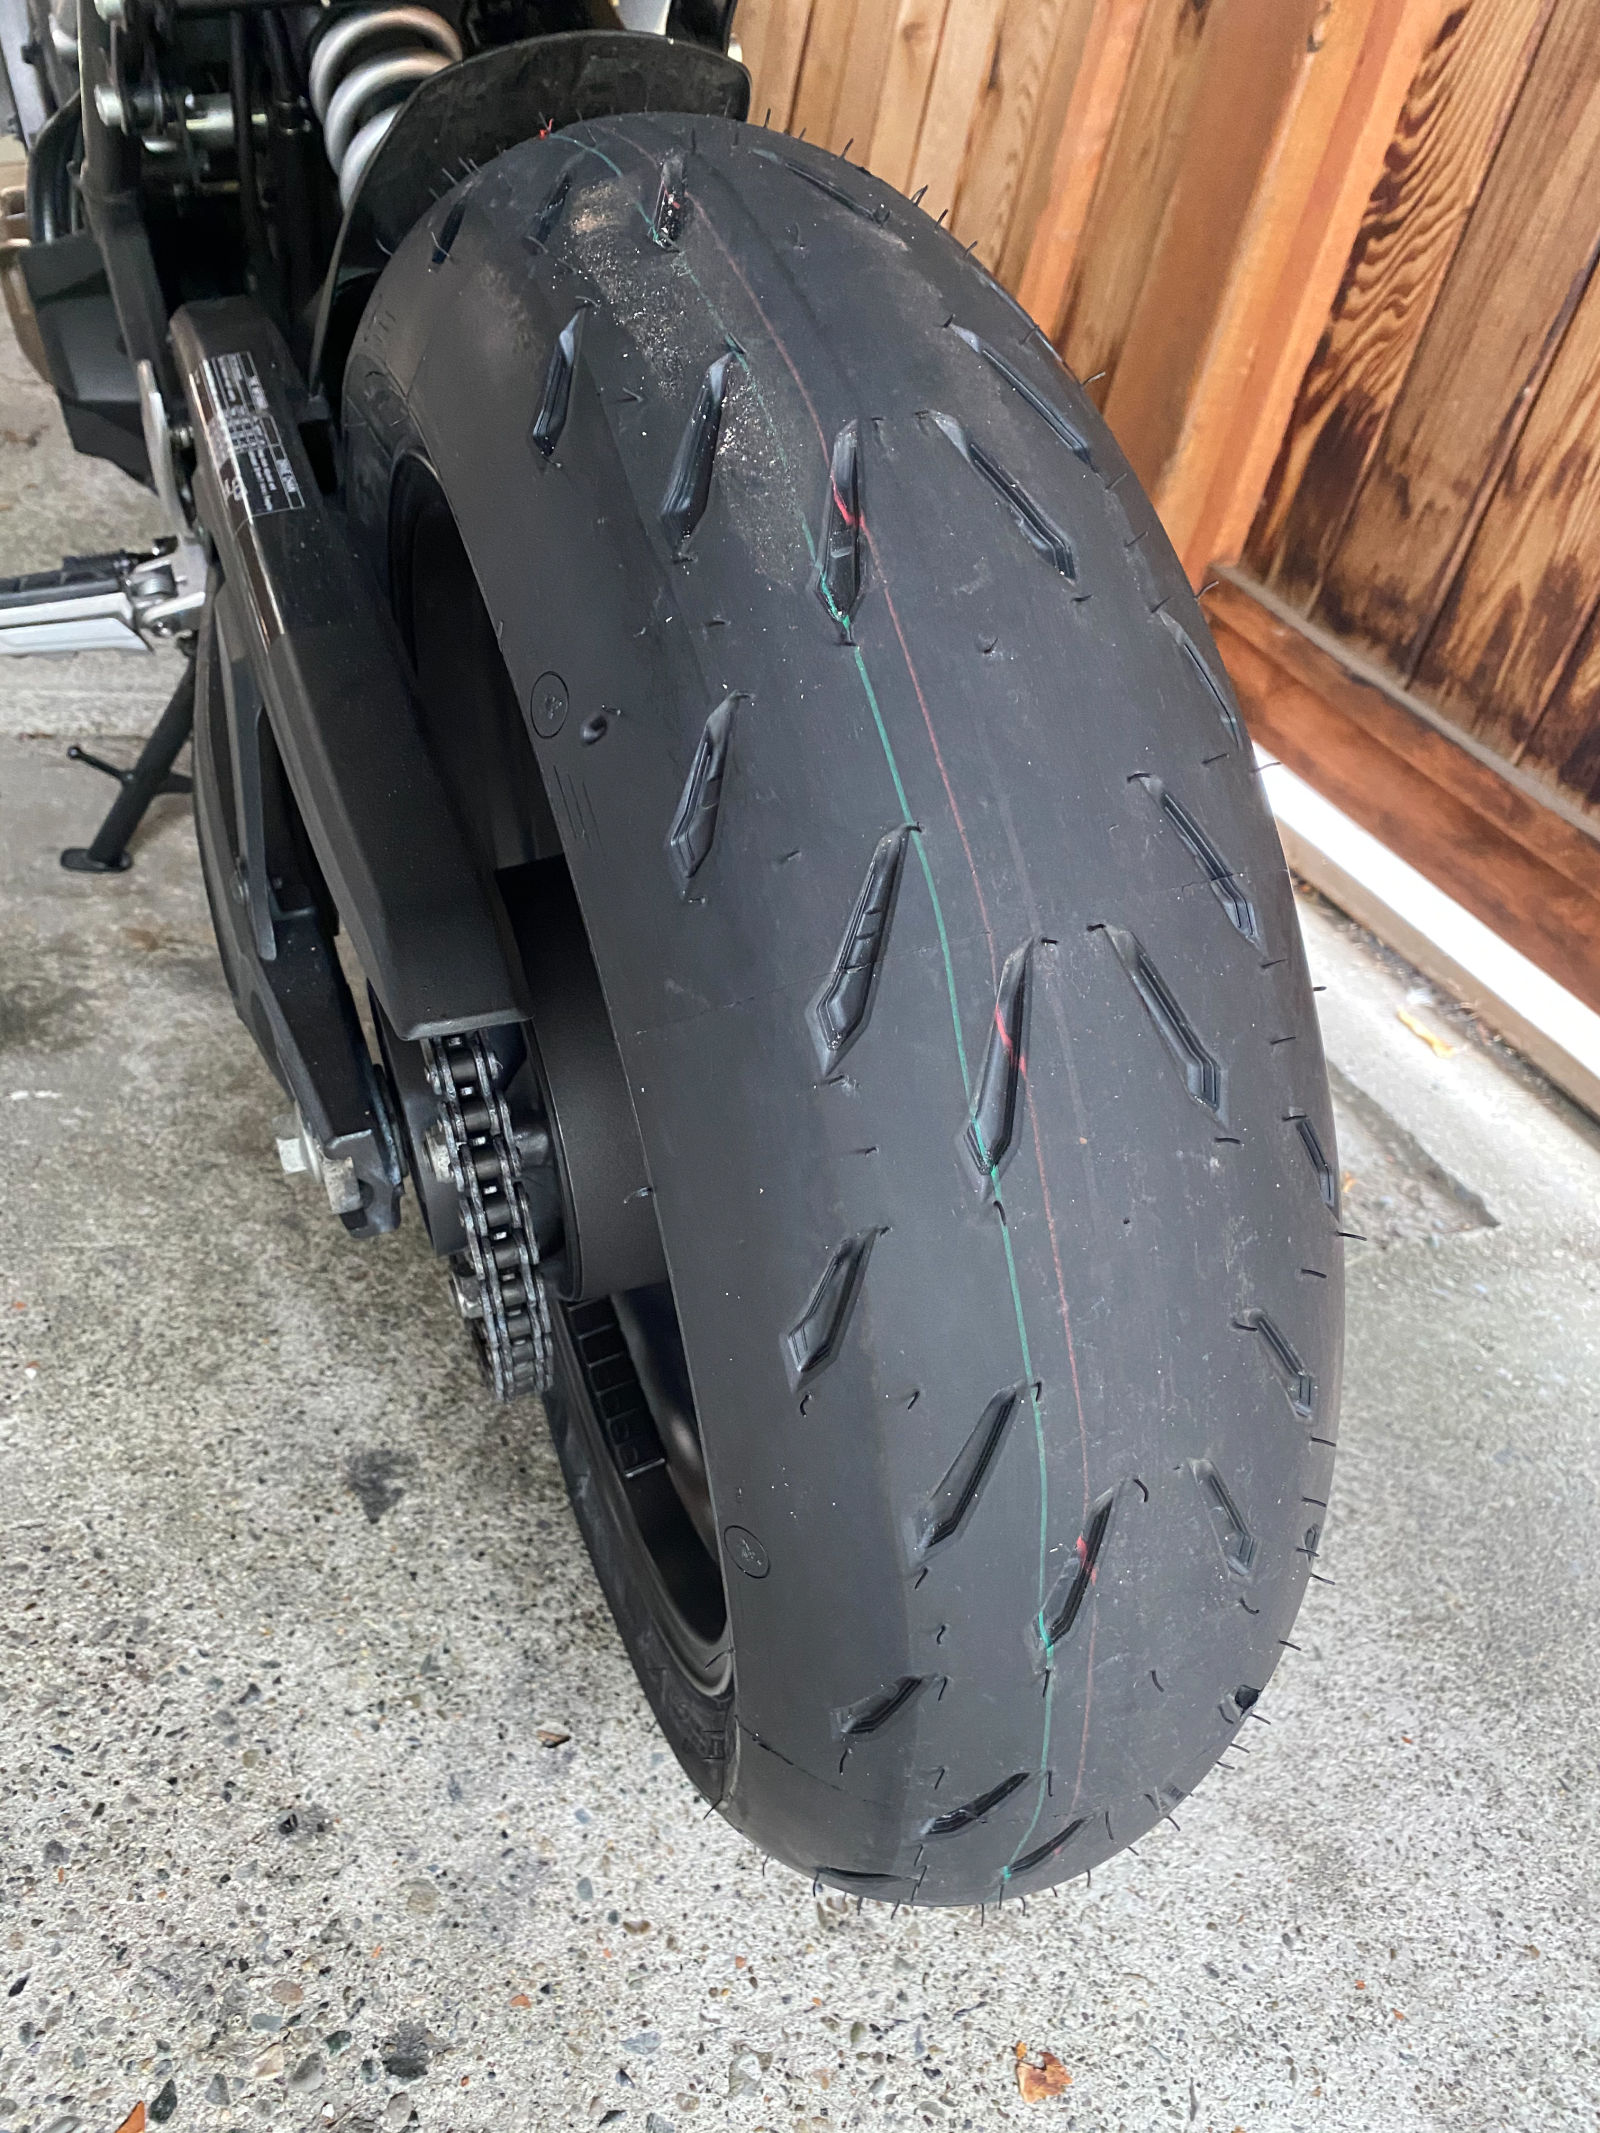 Remember, always use fresh rubber for protection!